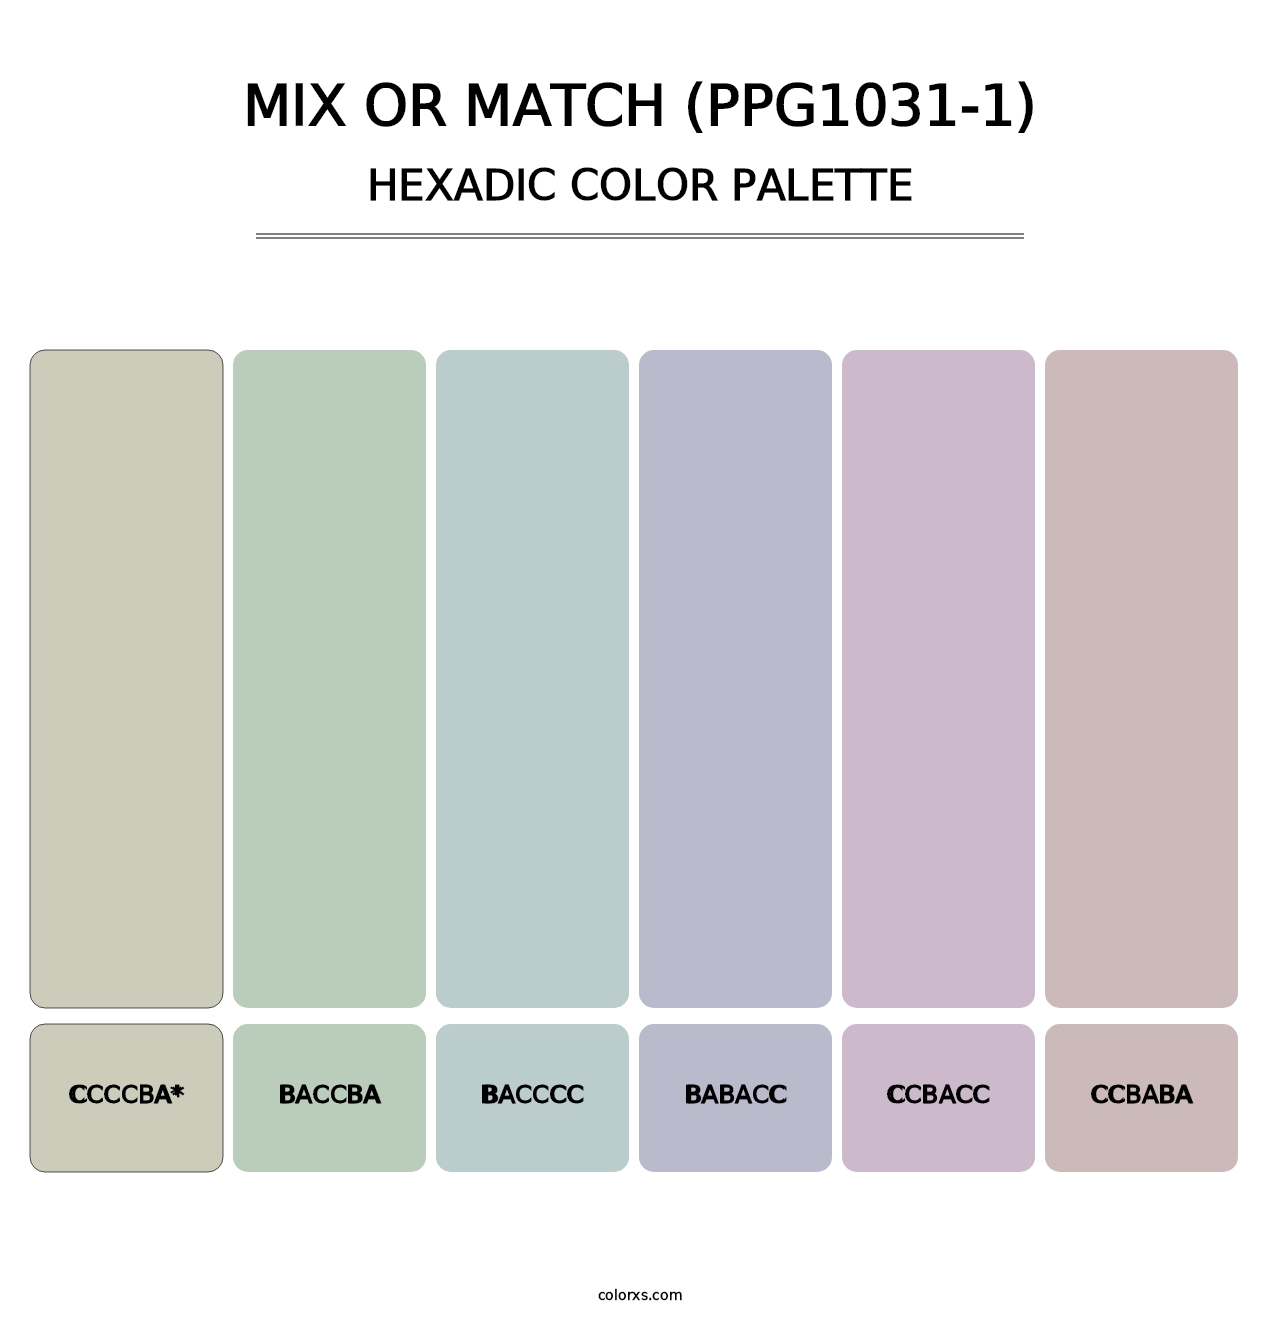 Mix Or Match (PPG1031-1) - Hexadic Color Palette